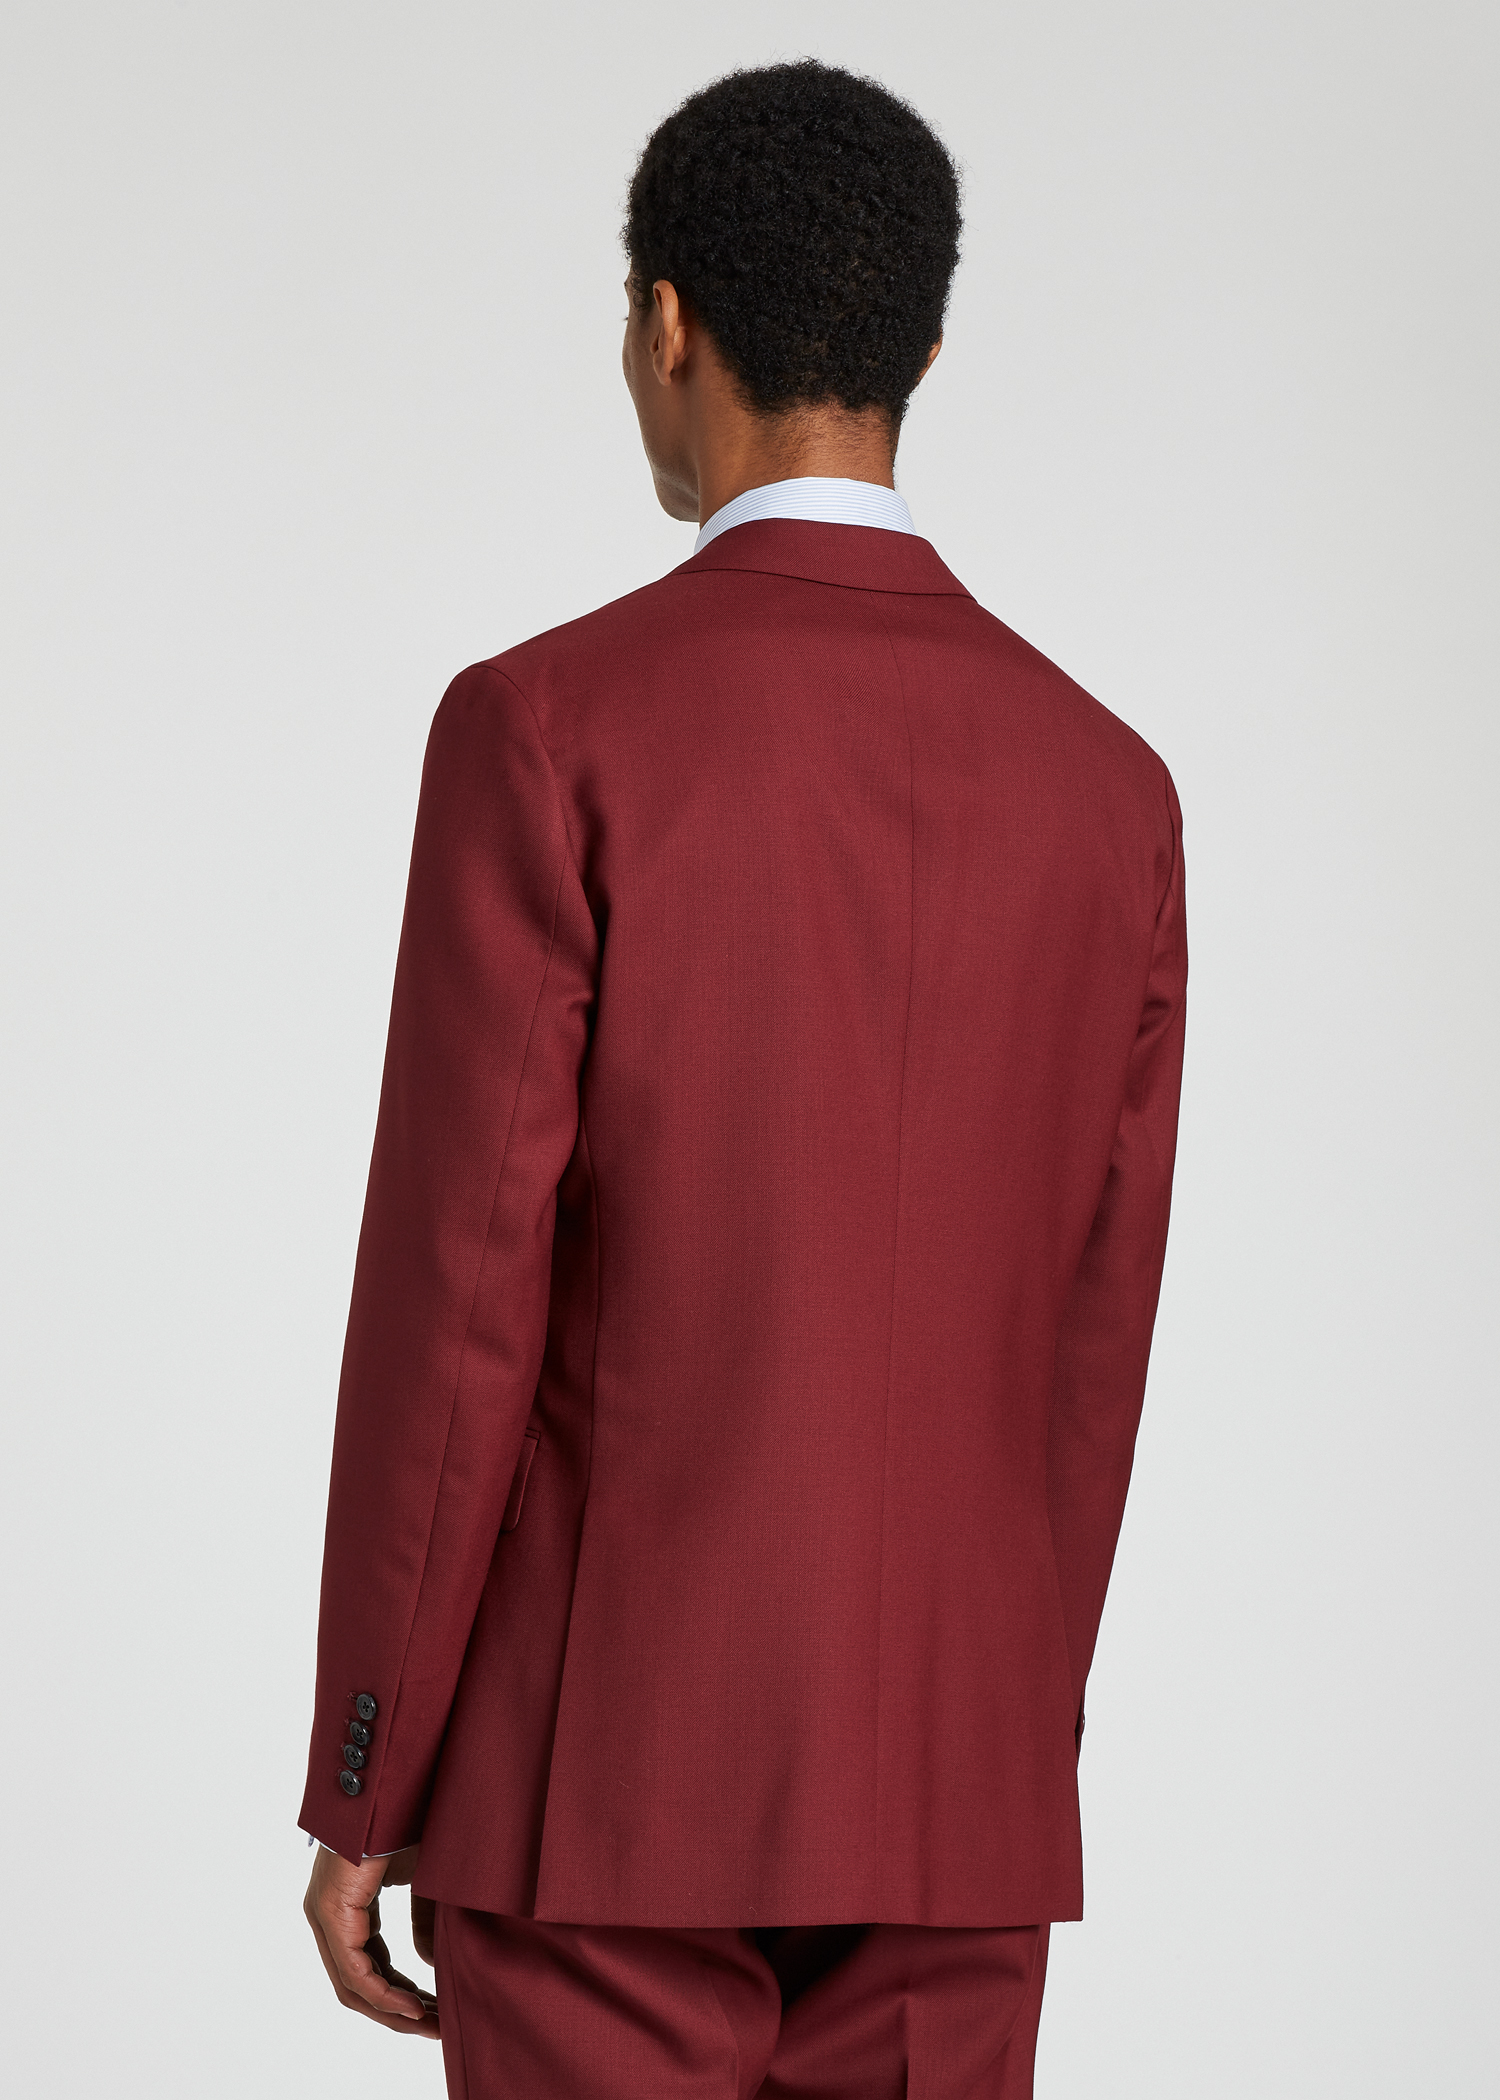 Model back view - A Suit To Travel In - Men's Cherry Red Wool Suit Paul Smith